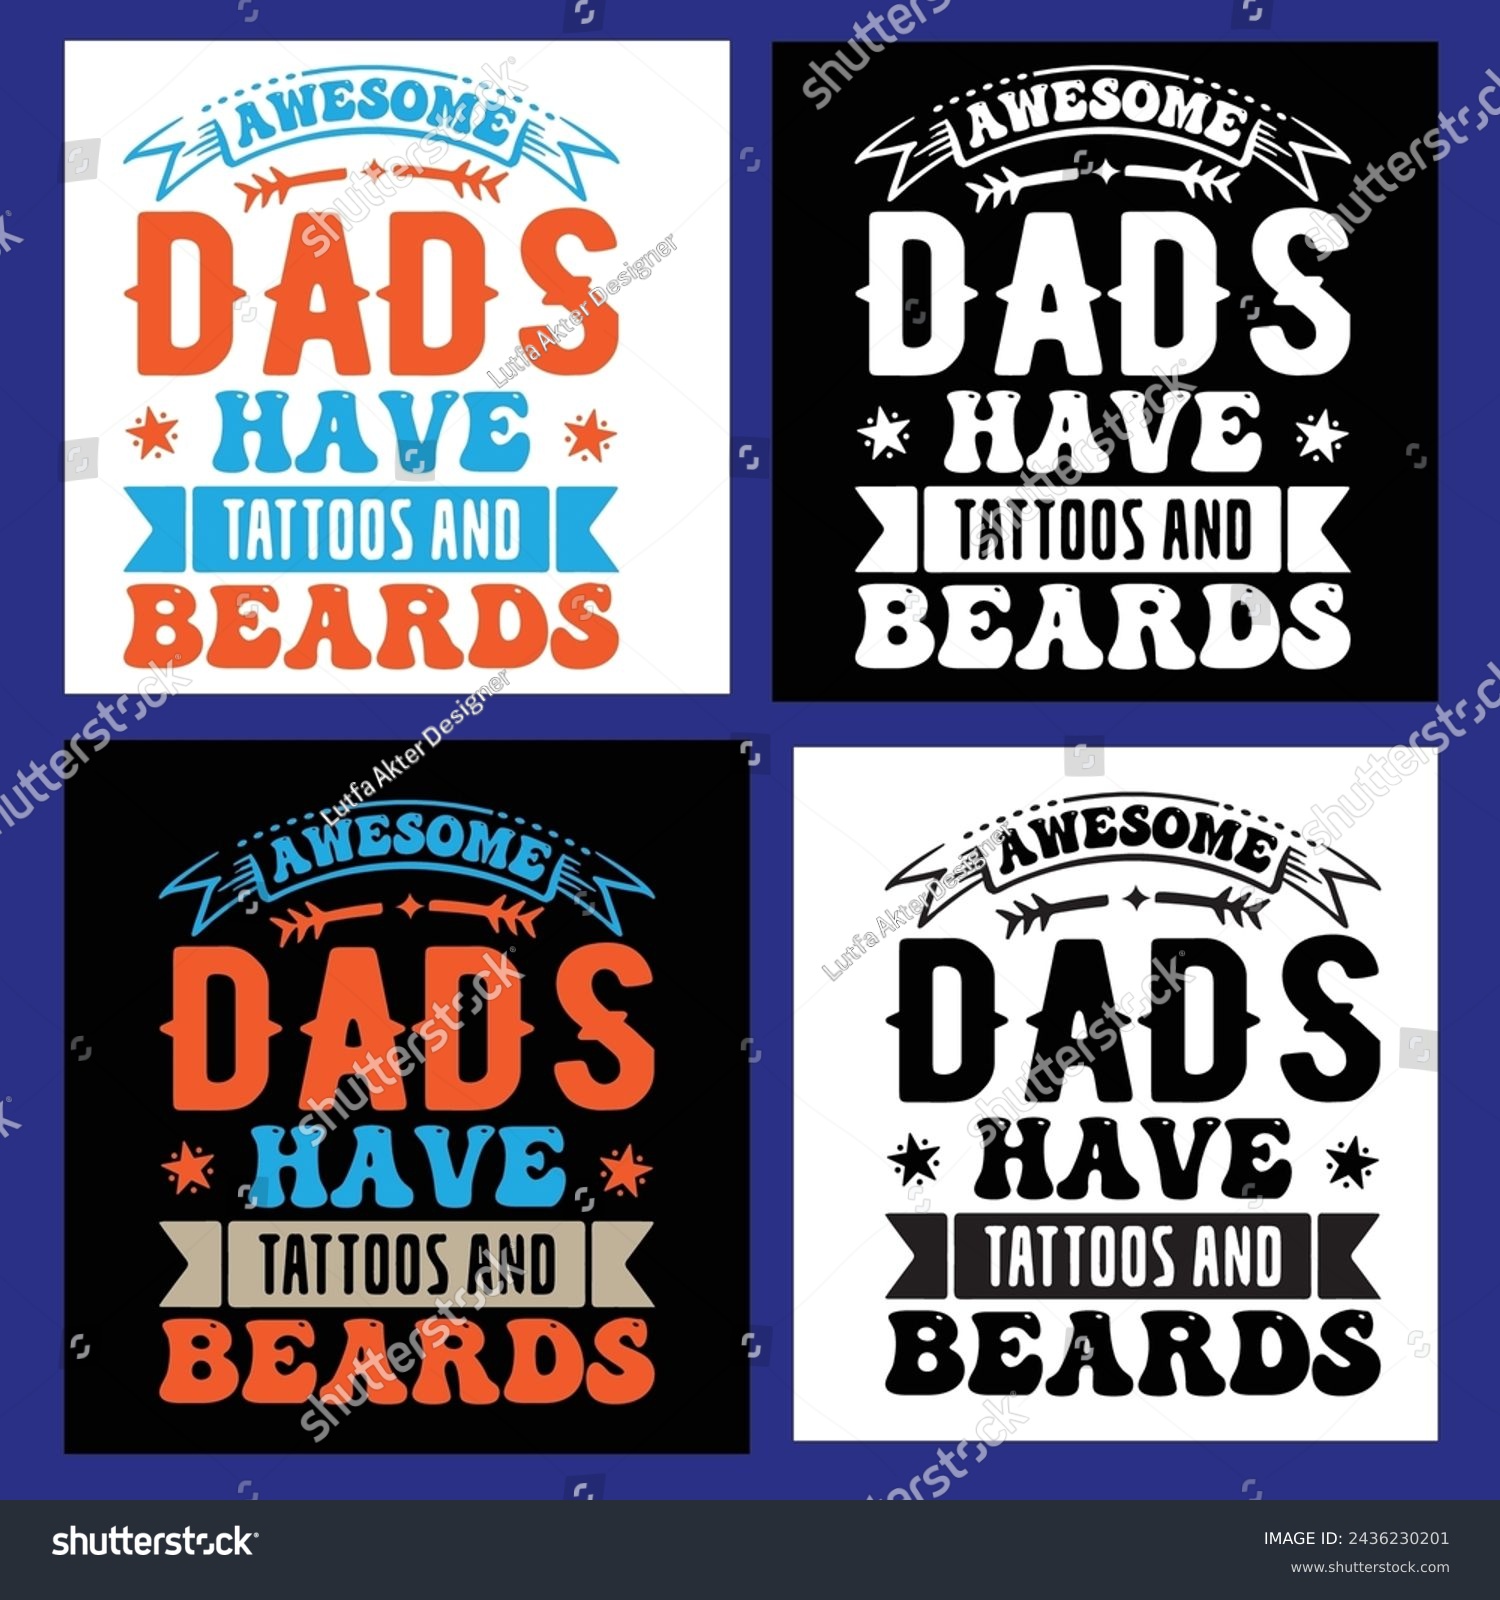 SVG of Awesome Dads Have Tattoos And Beards 
Father's Day Funny Fathers Day, svg